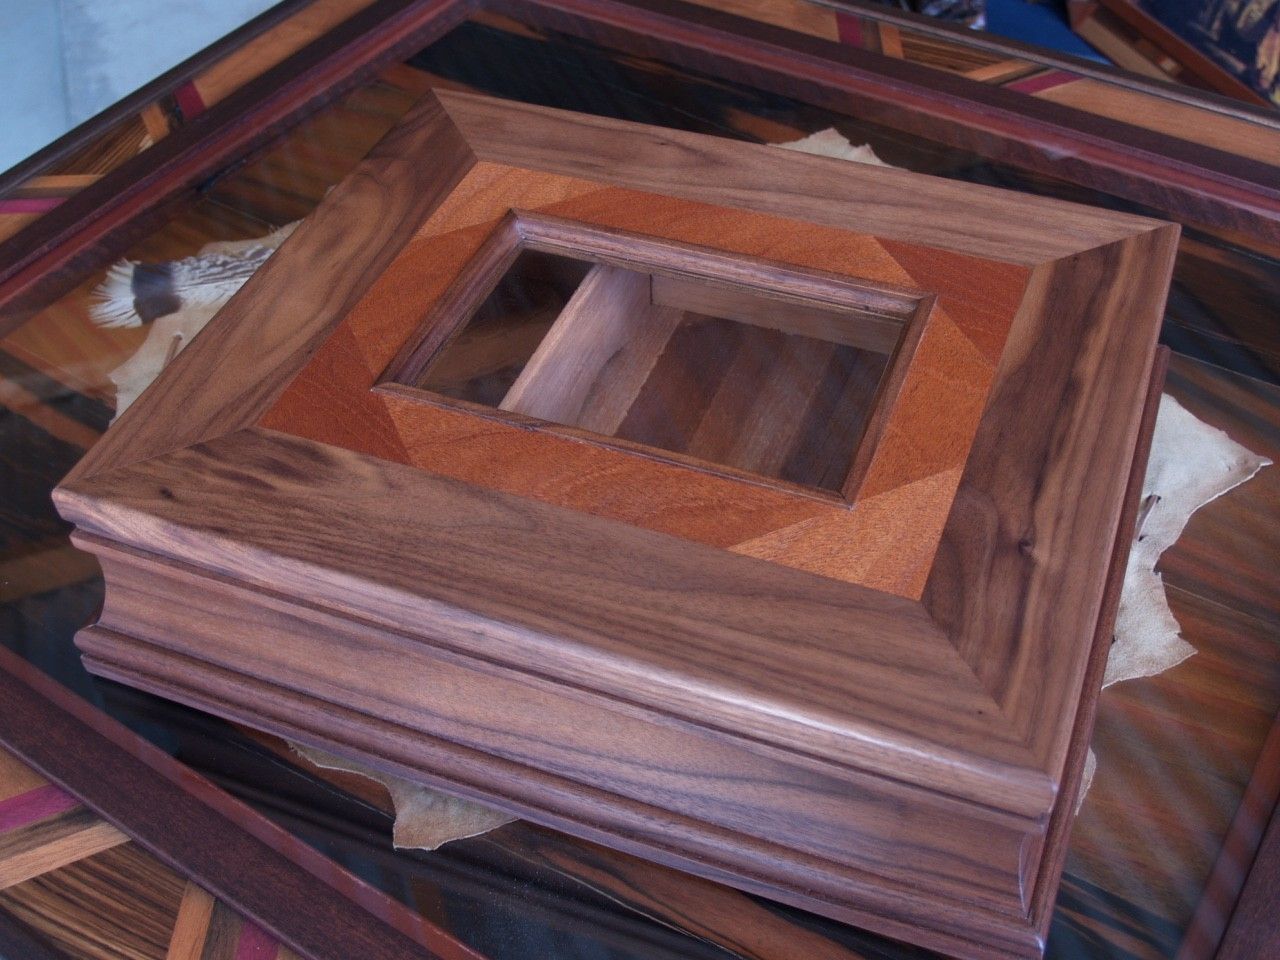 Hand Made In-Wall Humidor for cigars. Great gift for husband